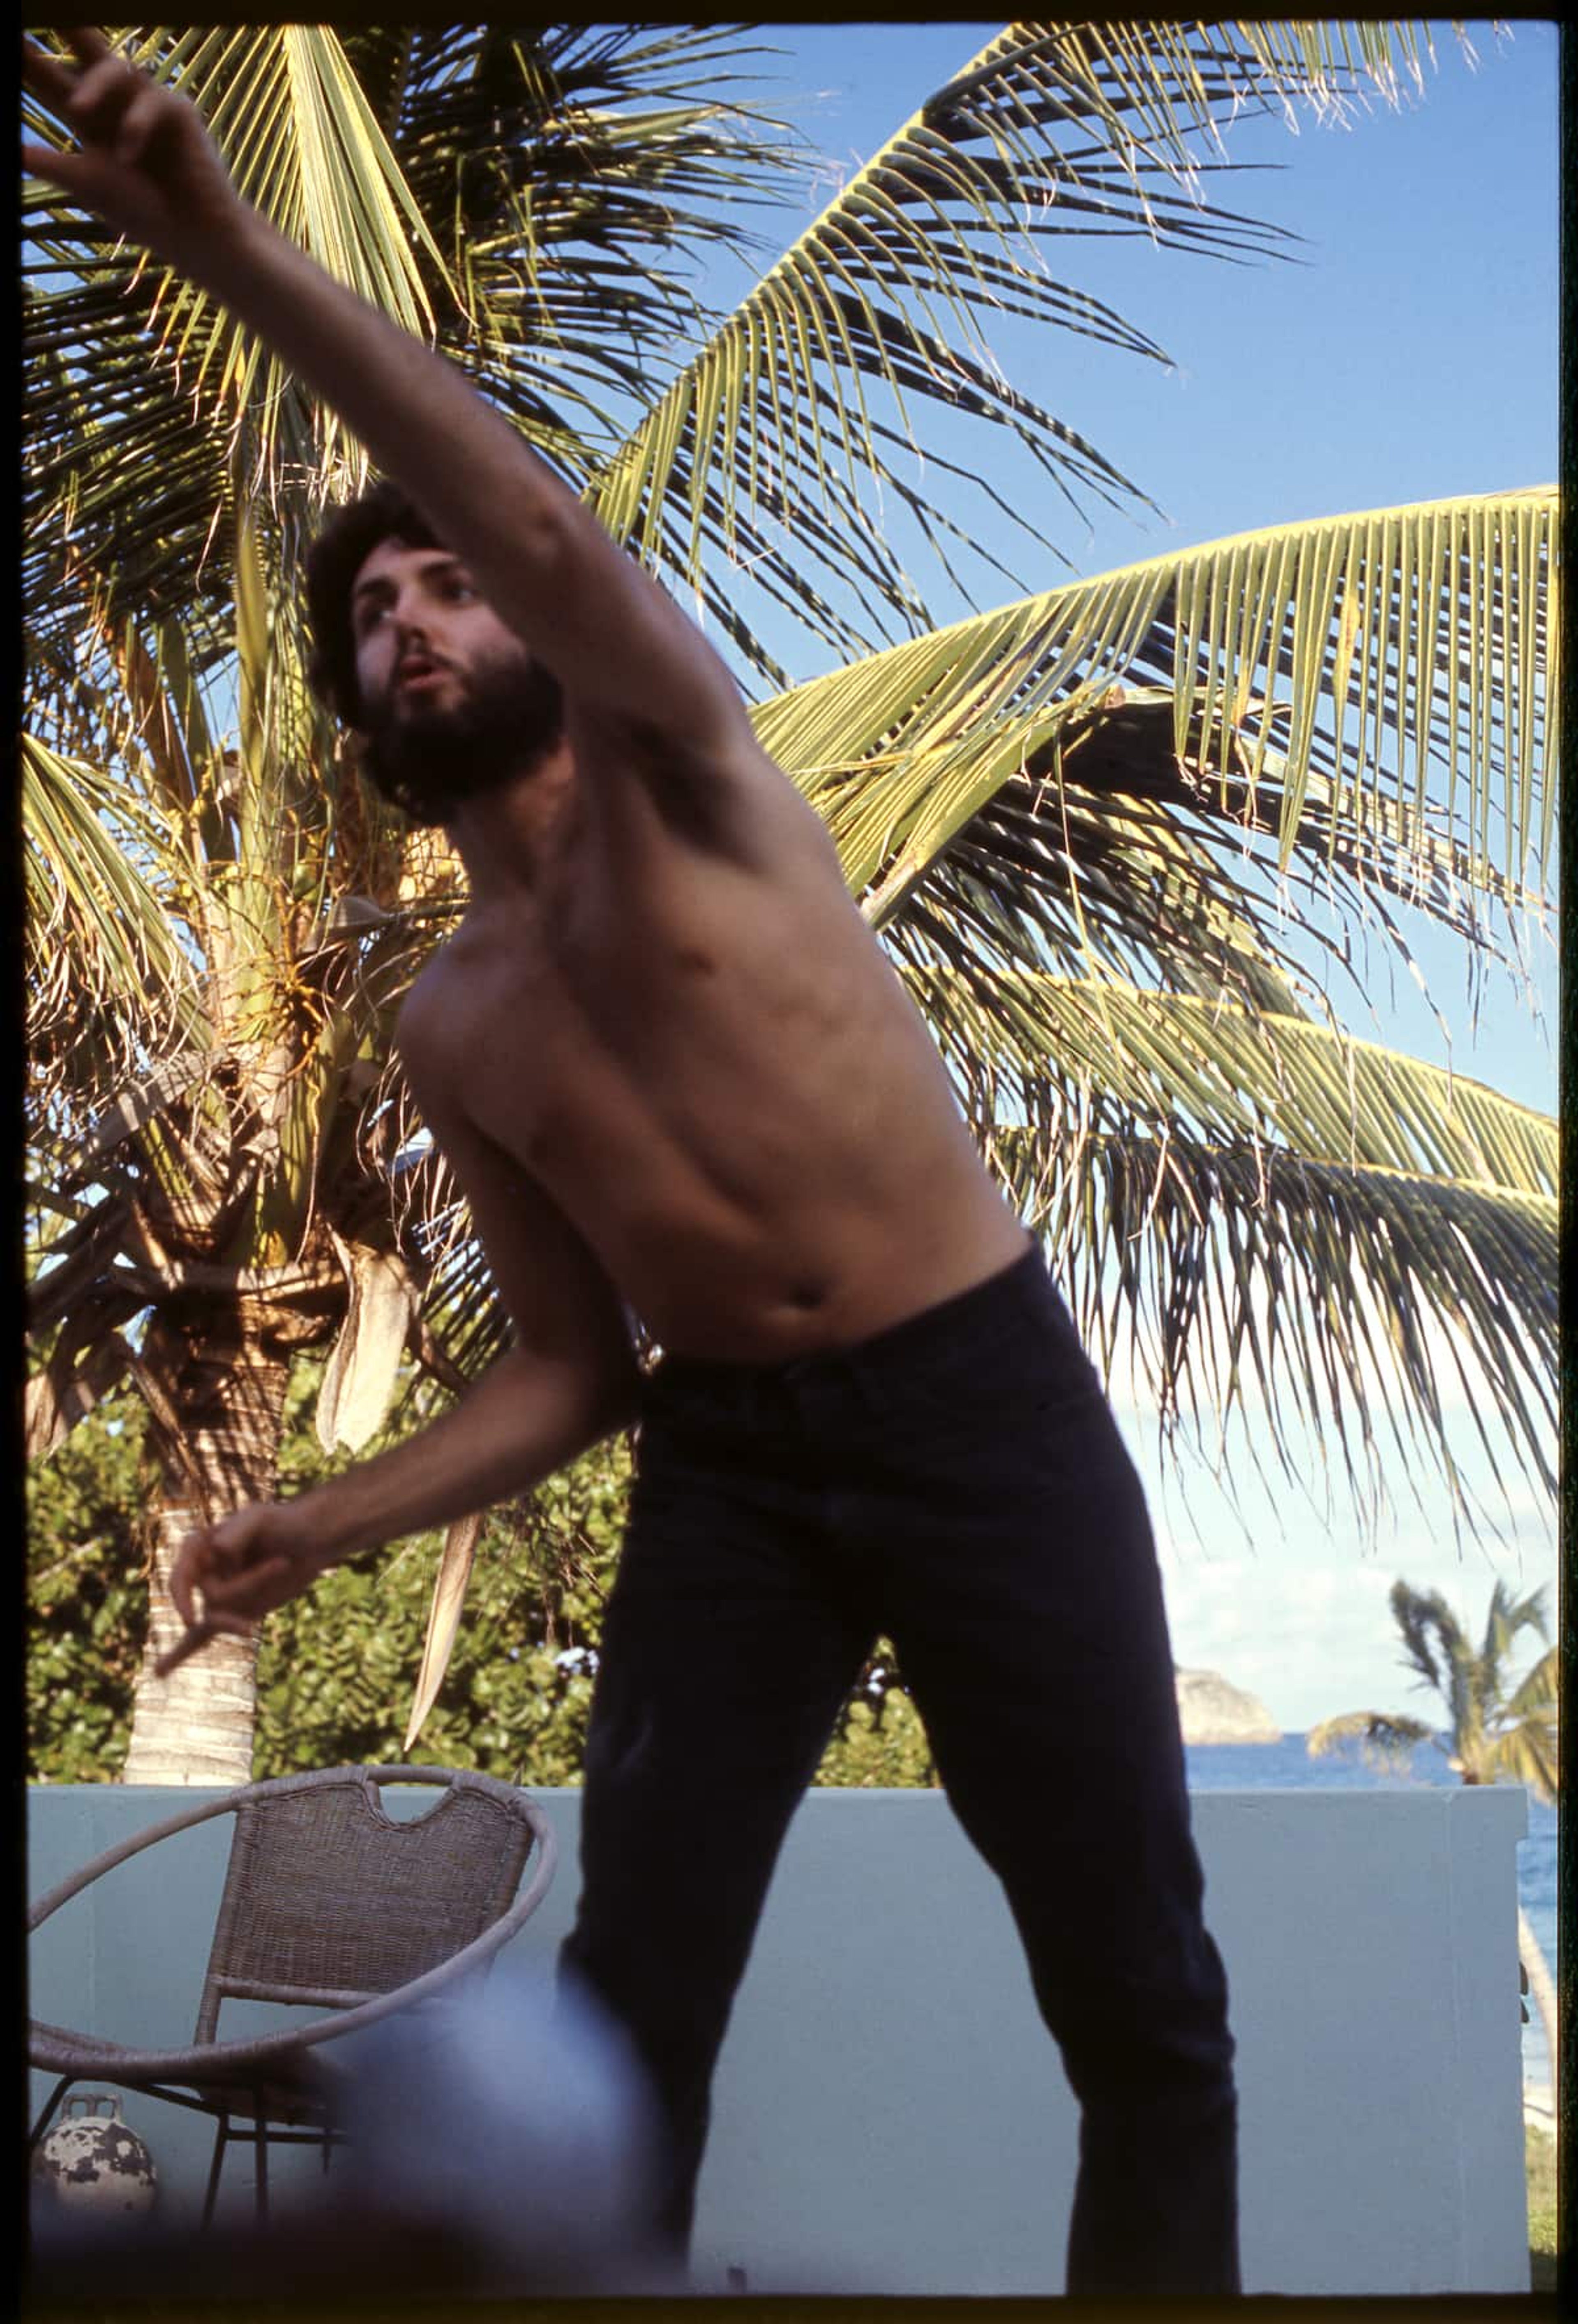 Photo of Paul McCartney reaching out in front of a palm tree